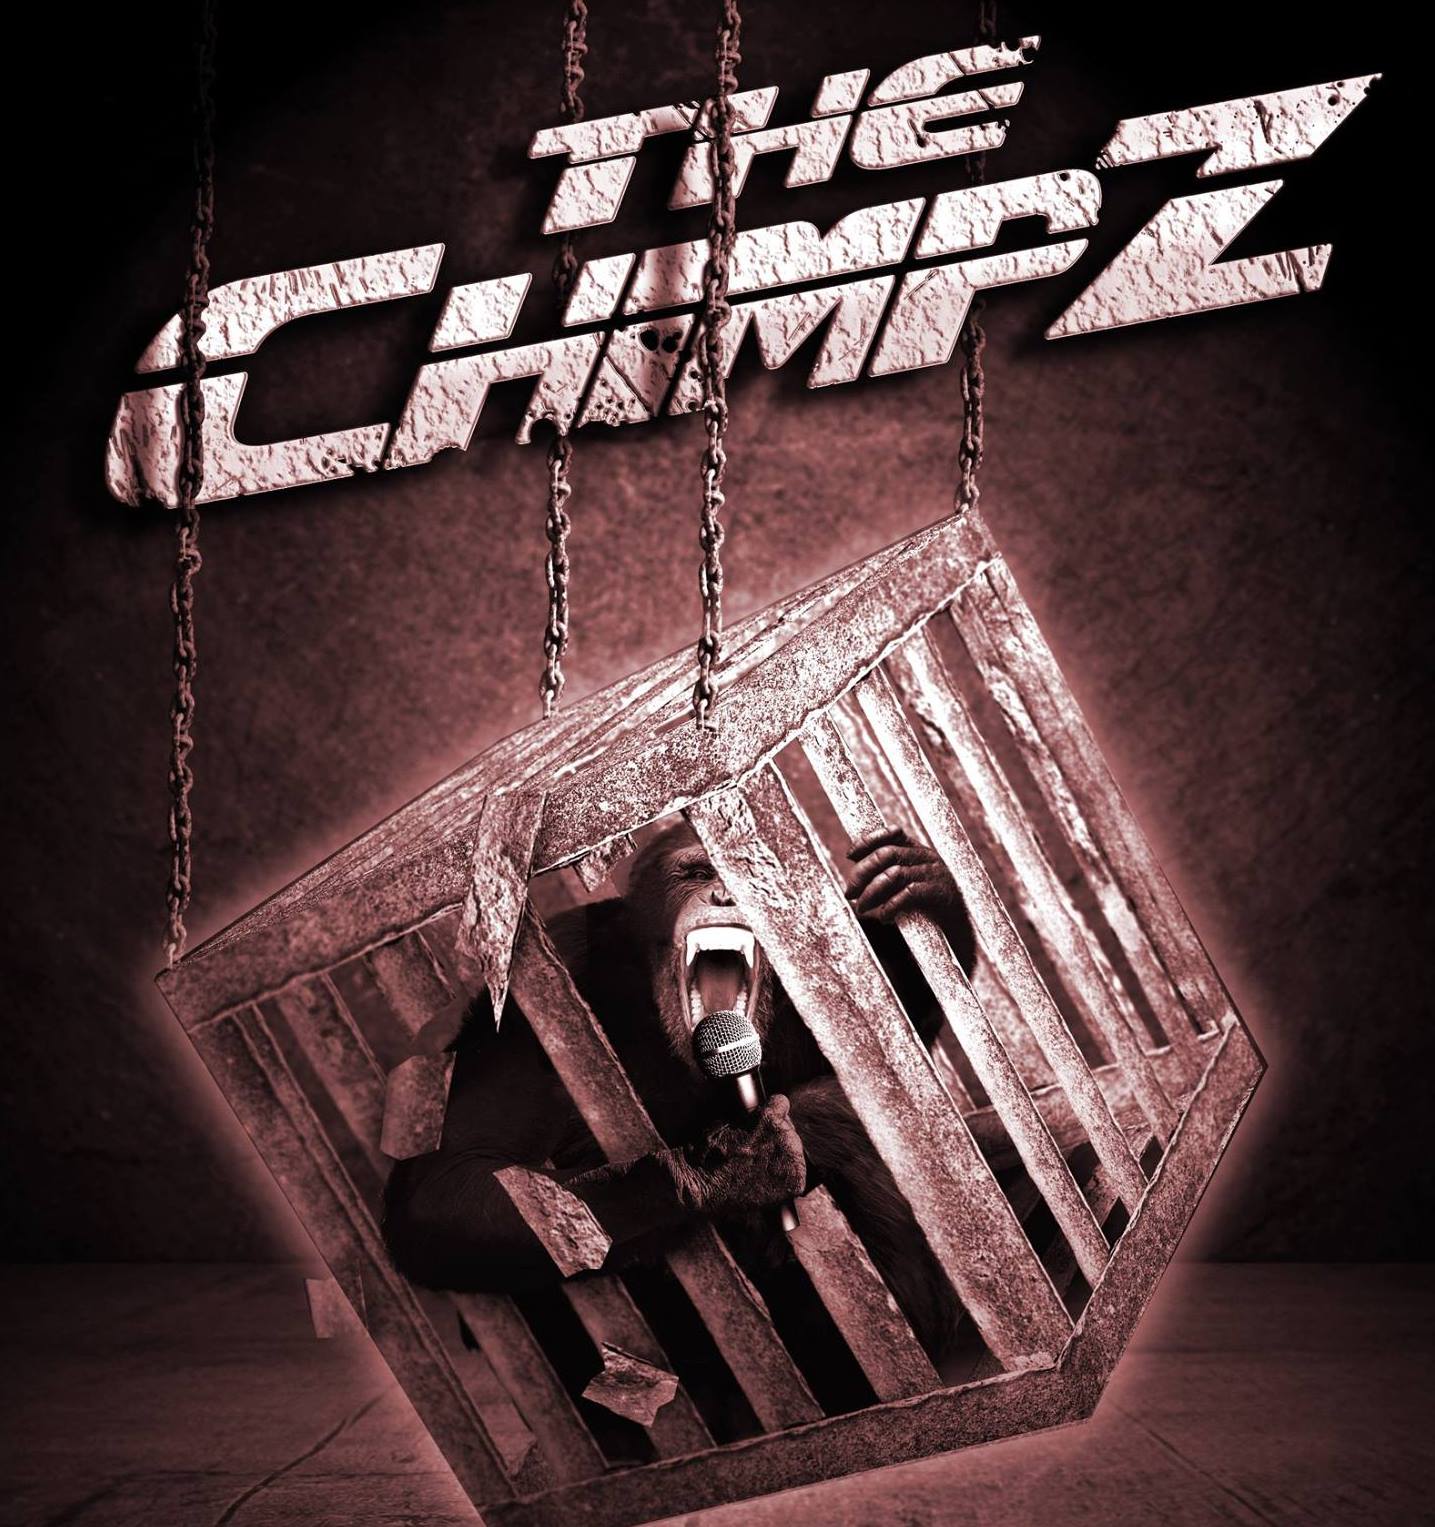 The Chimpz EP